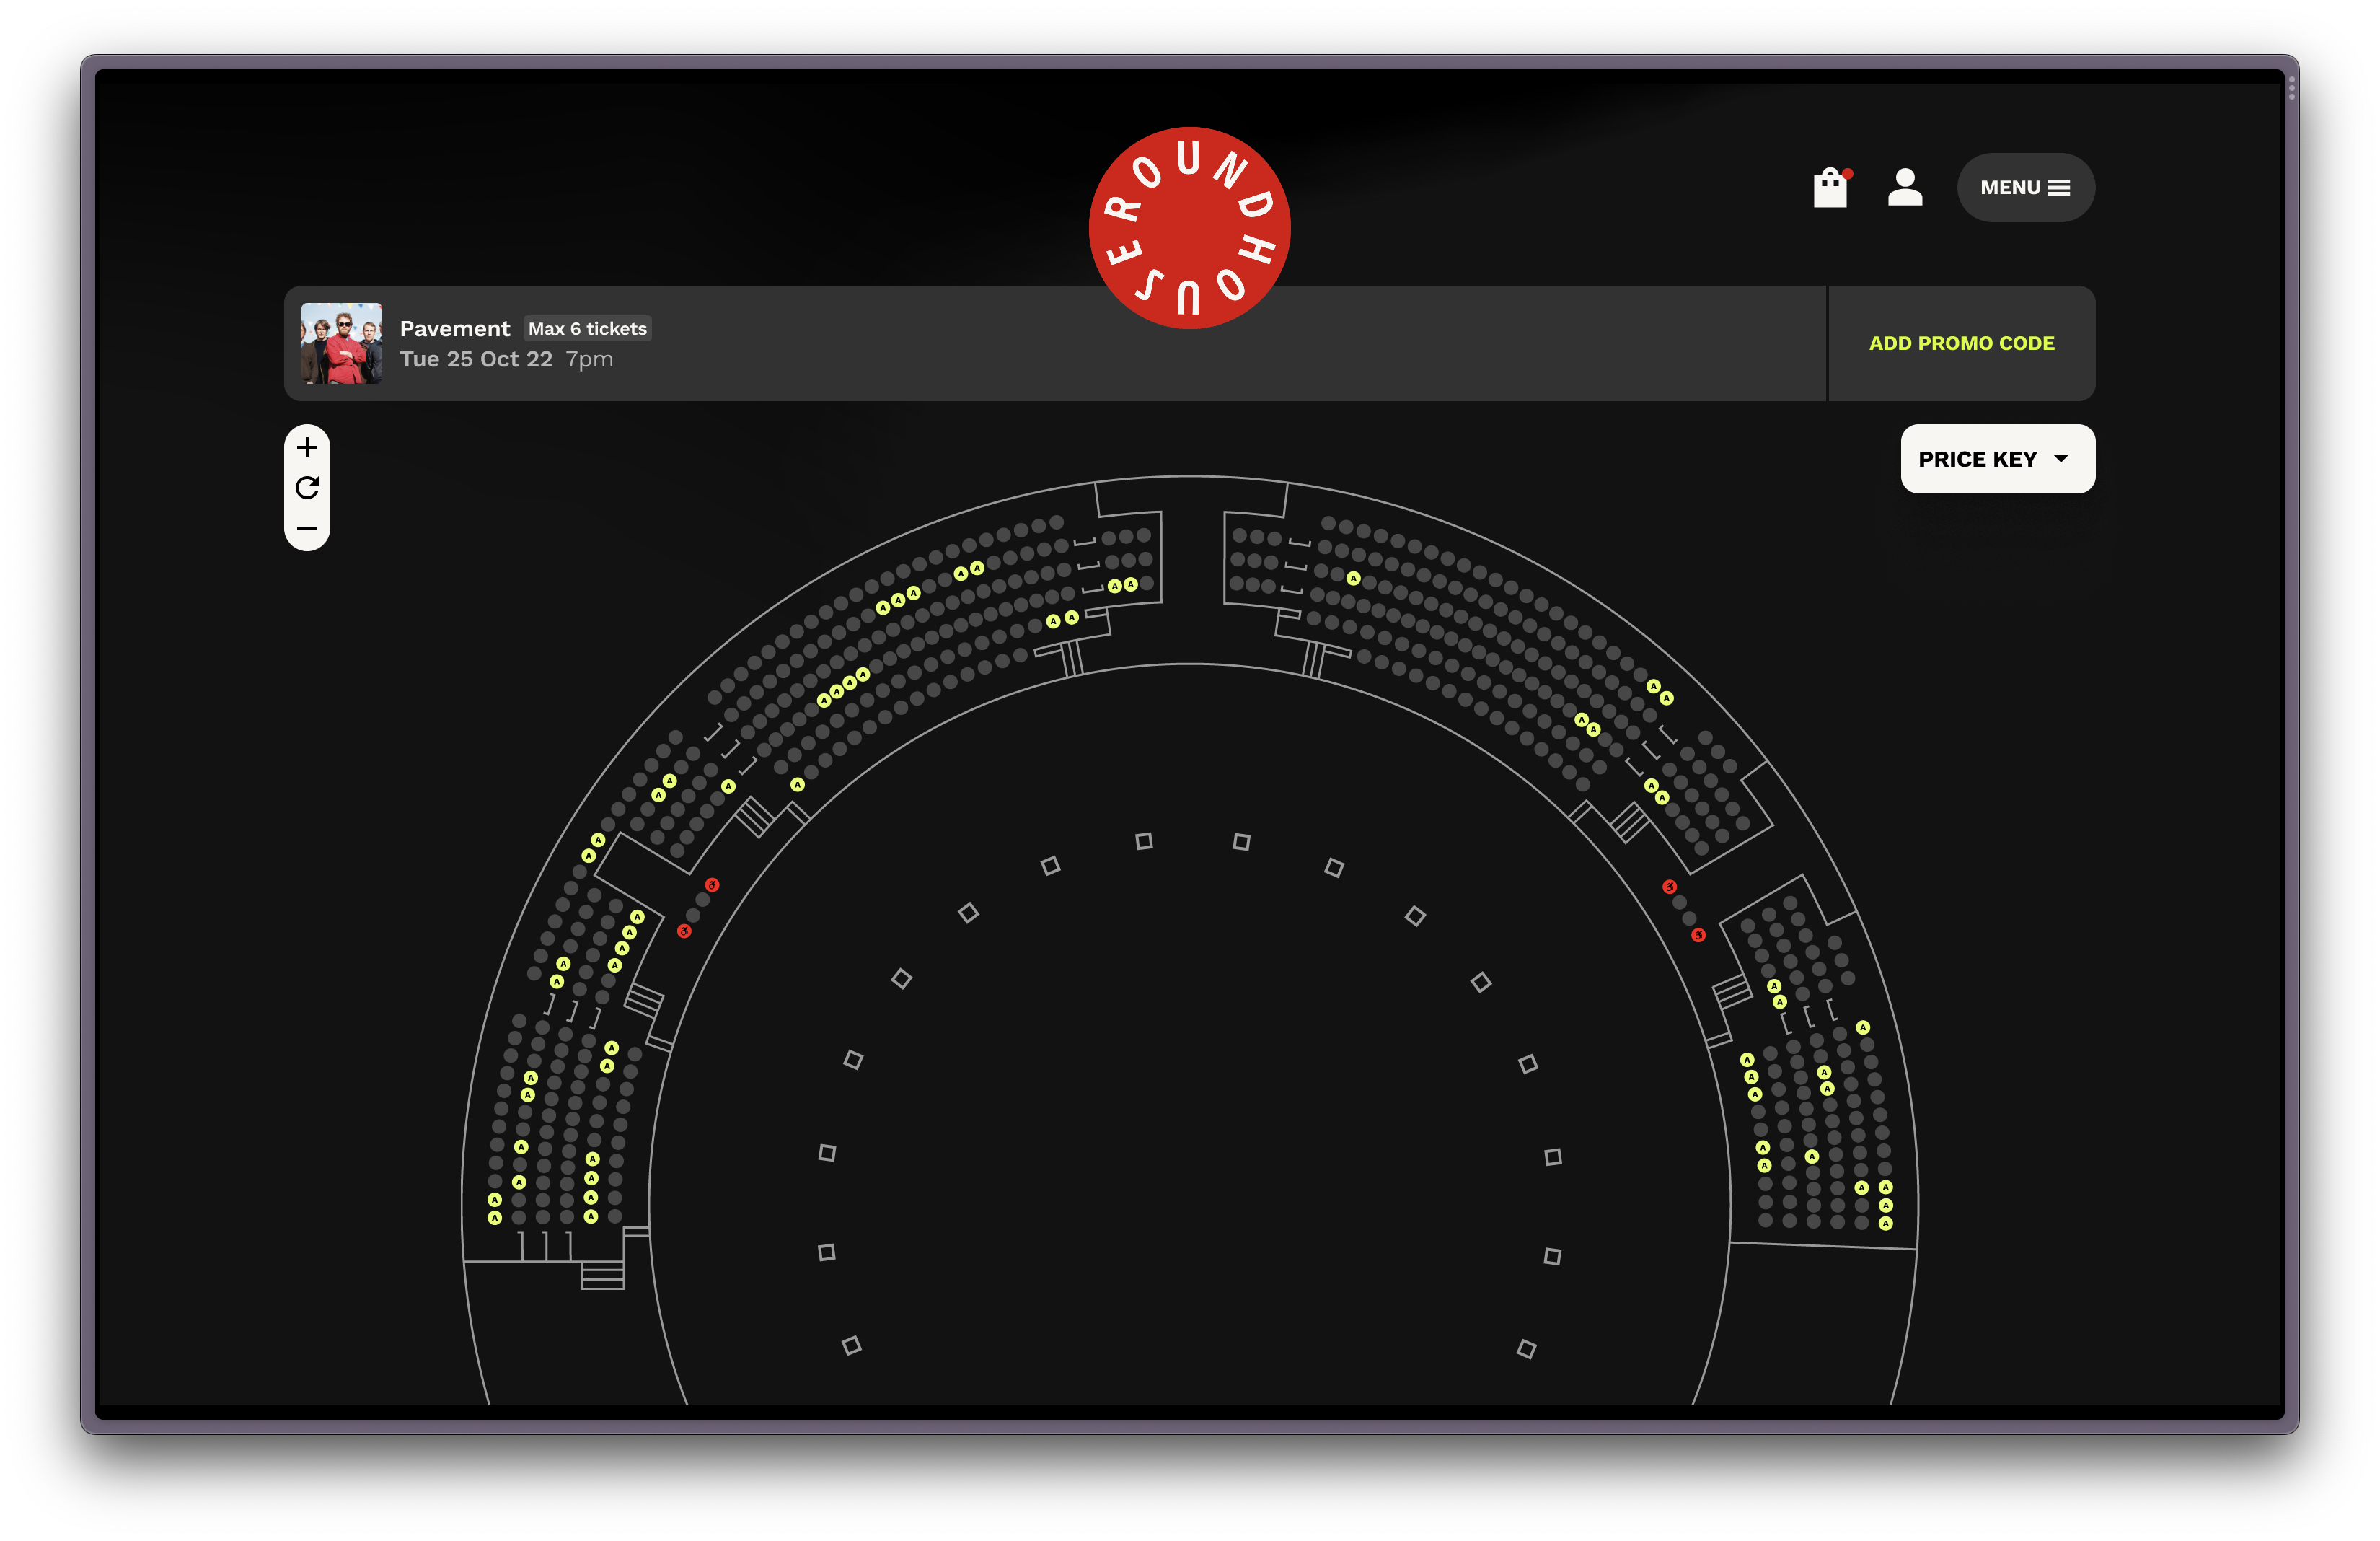 Screenshot of Roundhouse's seat map. The seatmap is displayed in the centre of the page, surrounded by a minimal UI.